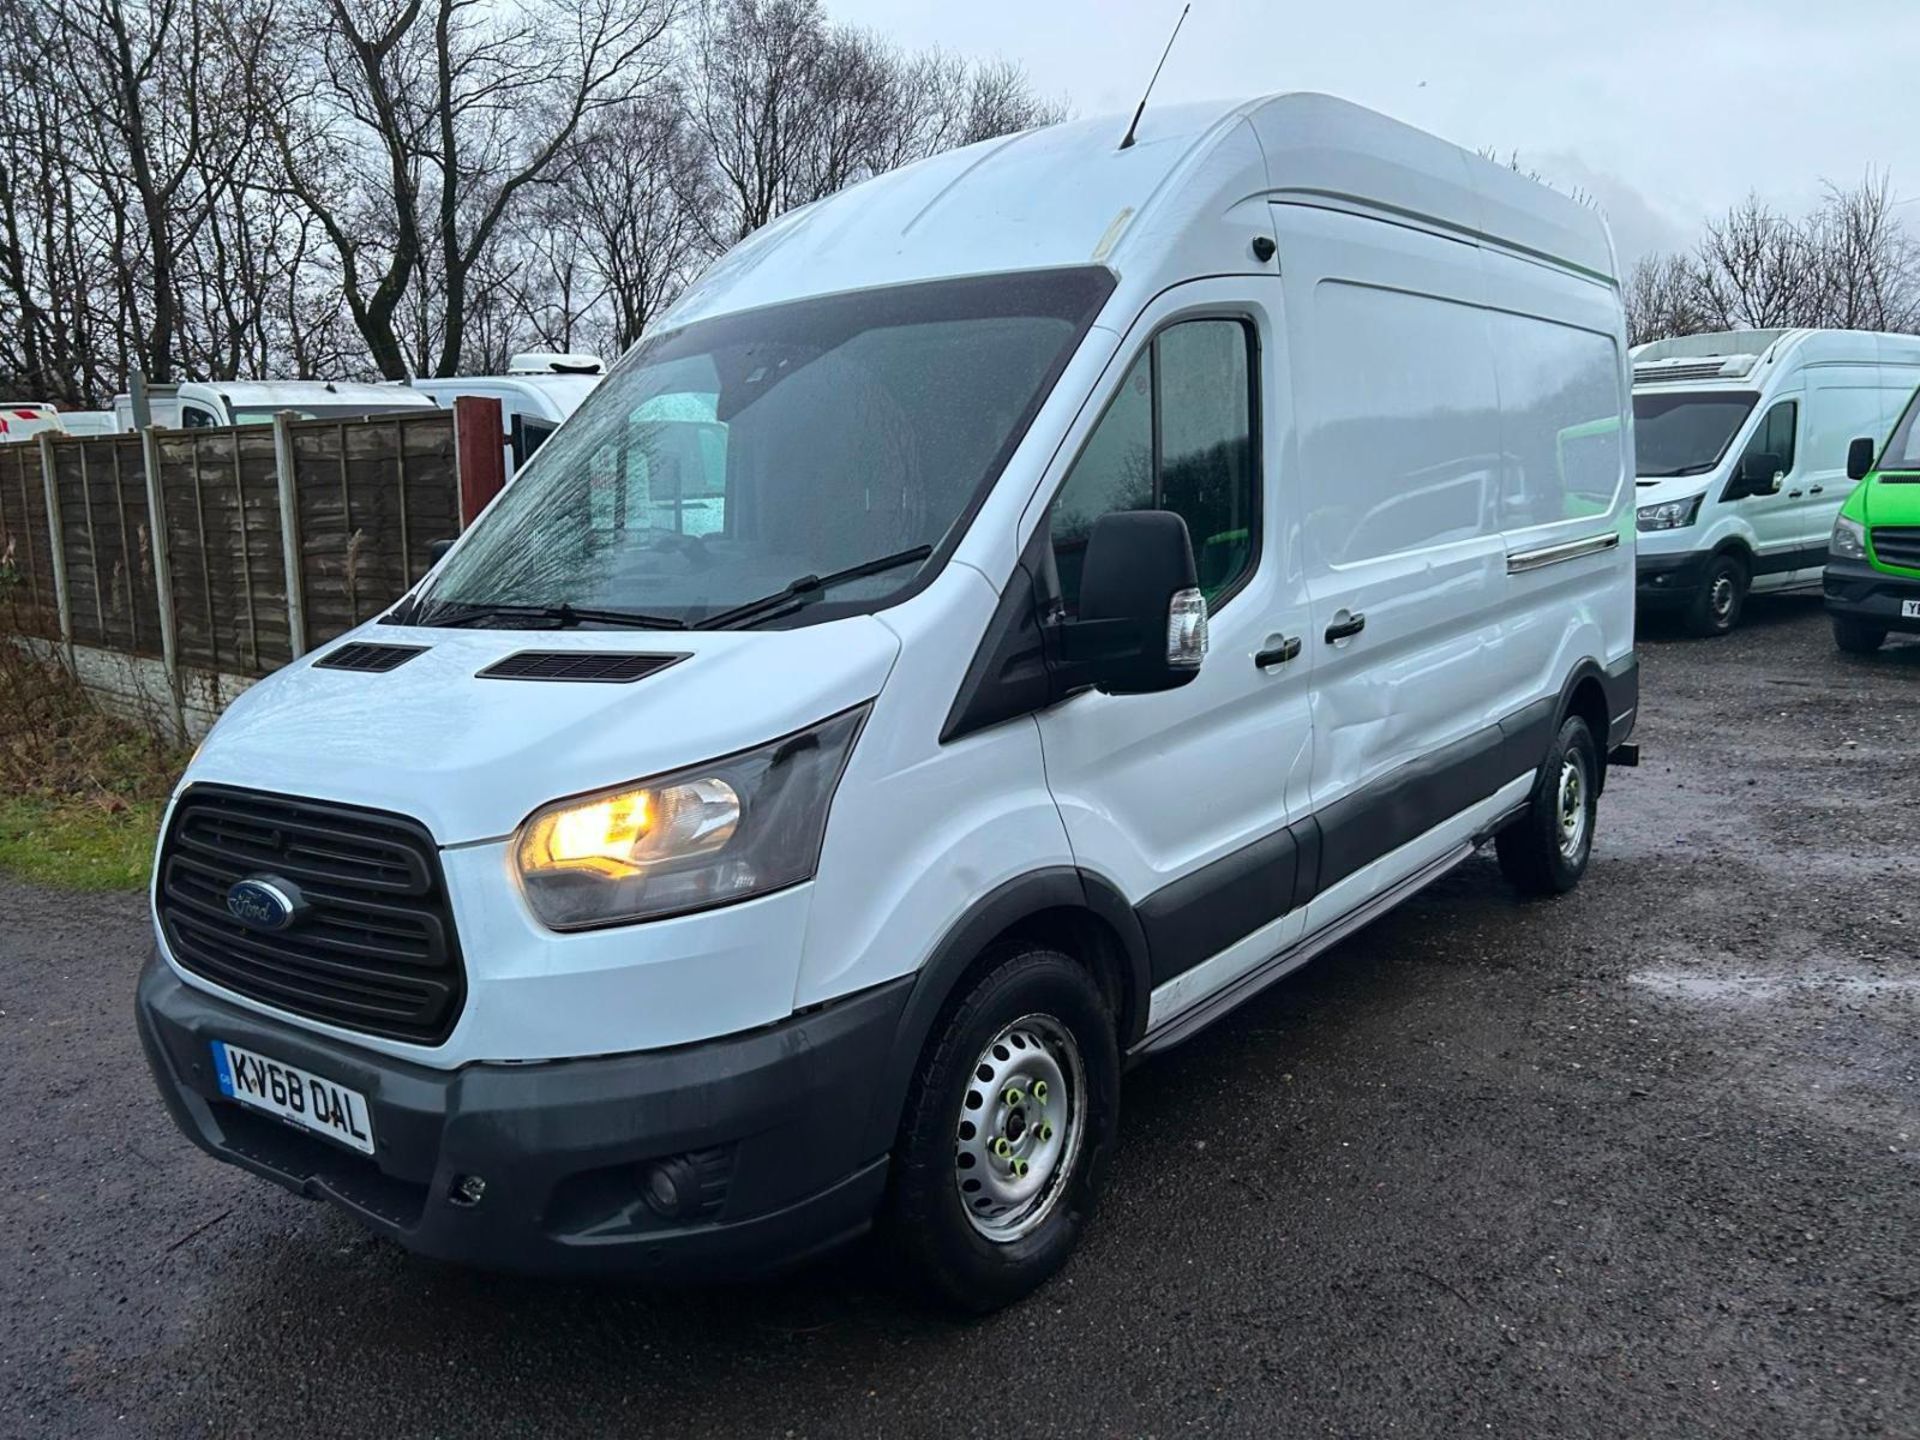 >>>SPECIAL CLEARANCE<<< 2018 FORD TRANSIT 2.0 TDCI 130PS L3 H3 PANEL VAN